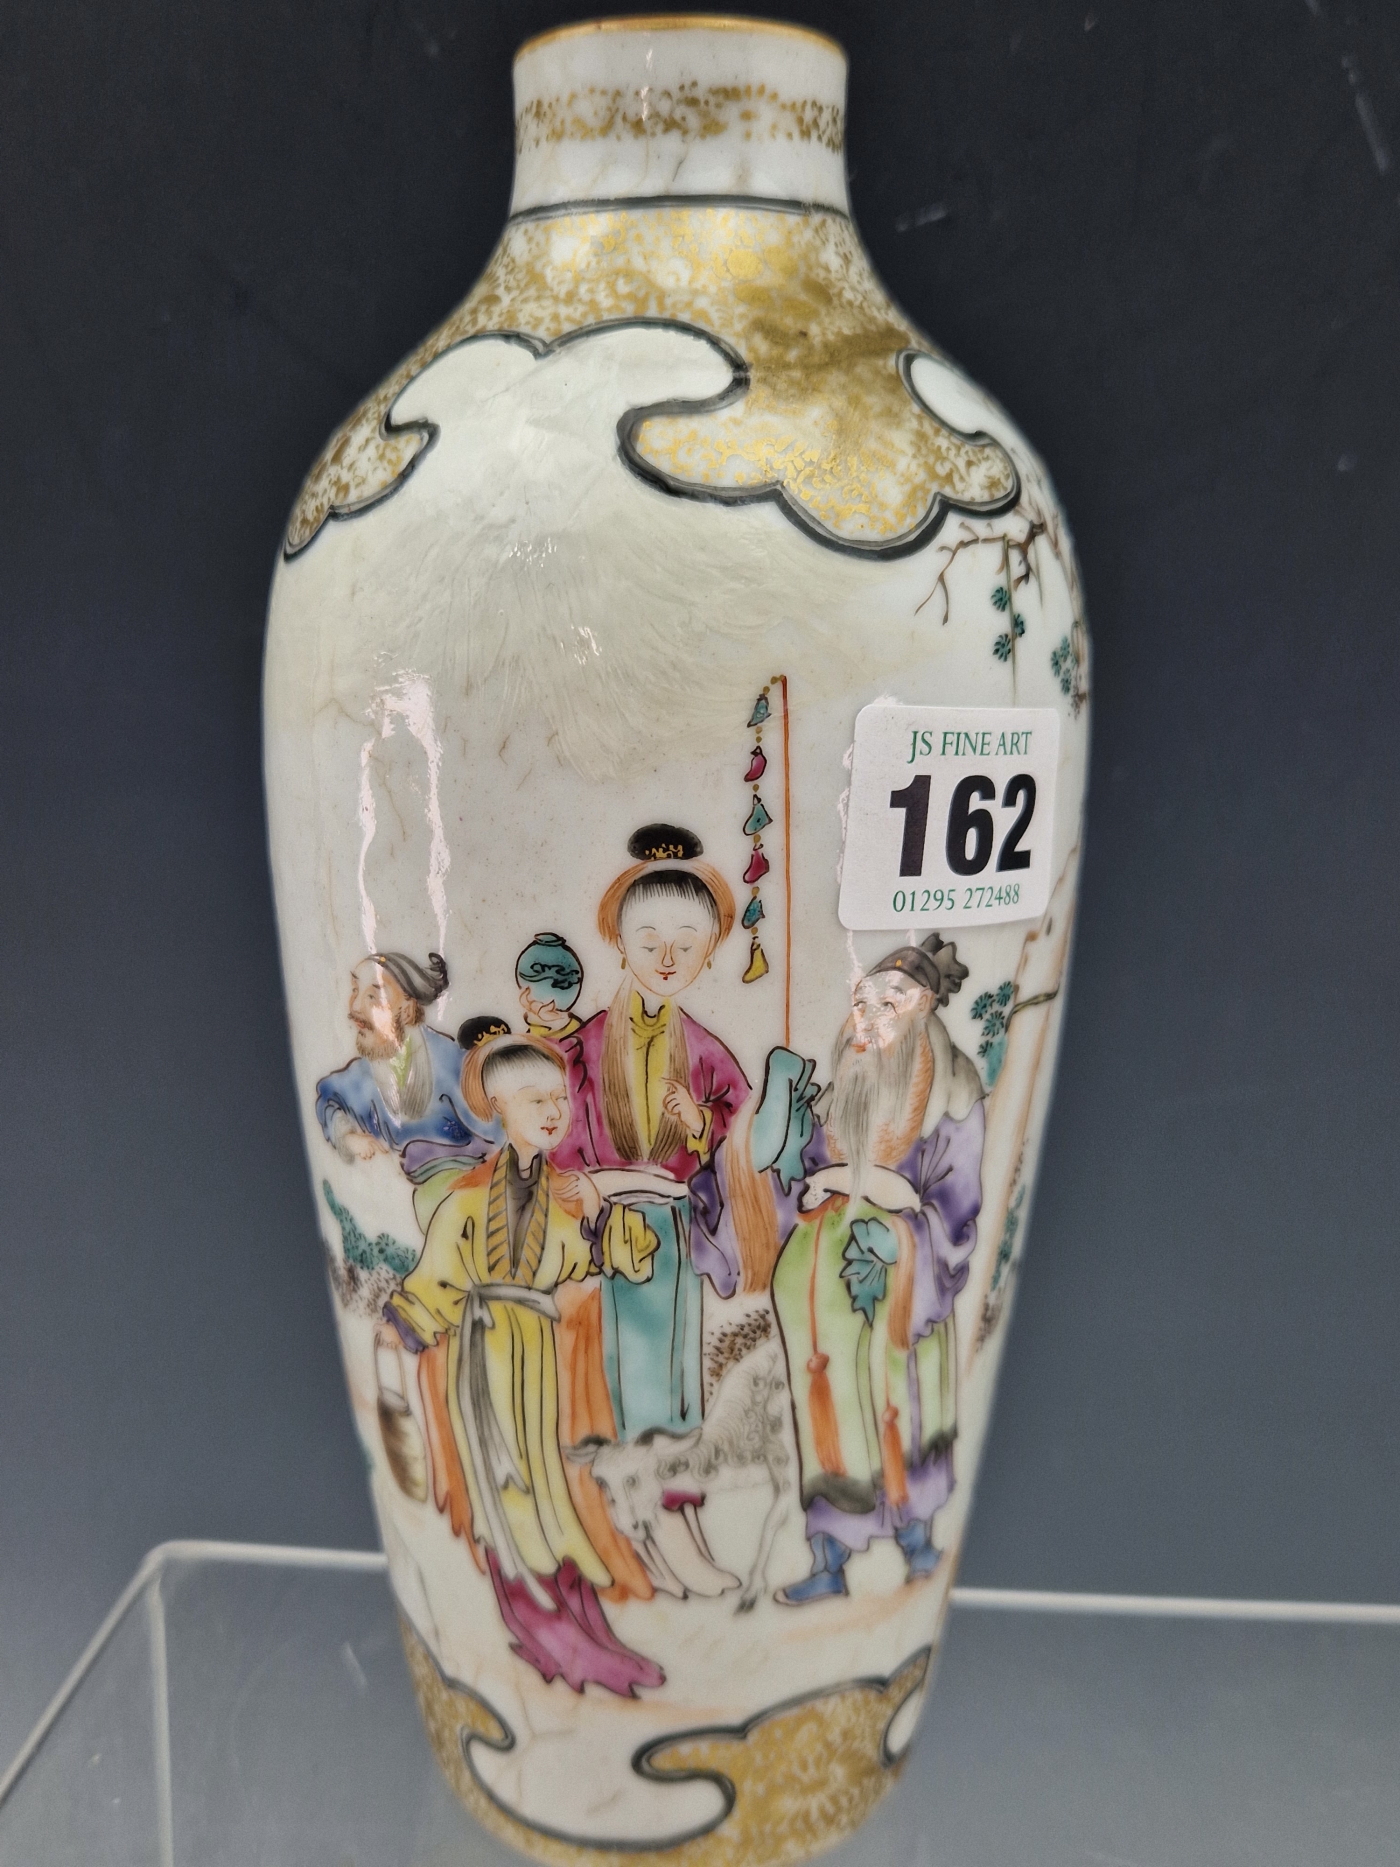 A LATE 18th C. CHINESE VASE PAINTED WITH GUANDI AND OTHER FIGURES IN A LANDSCAPE AND BETWEEN BLACK - Image 4 of 8